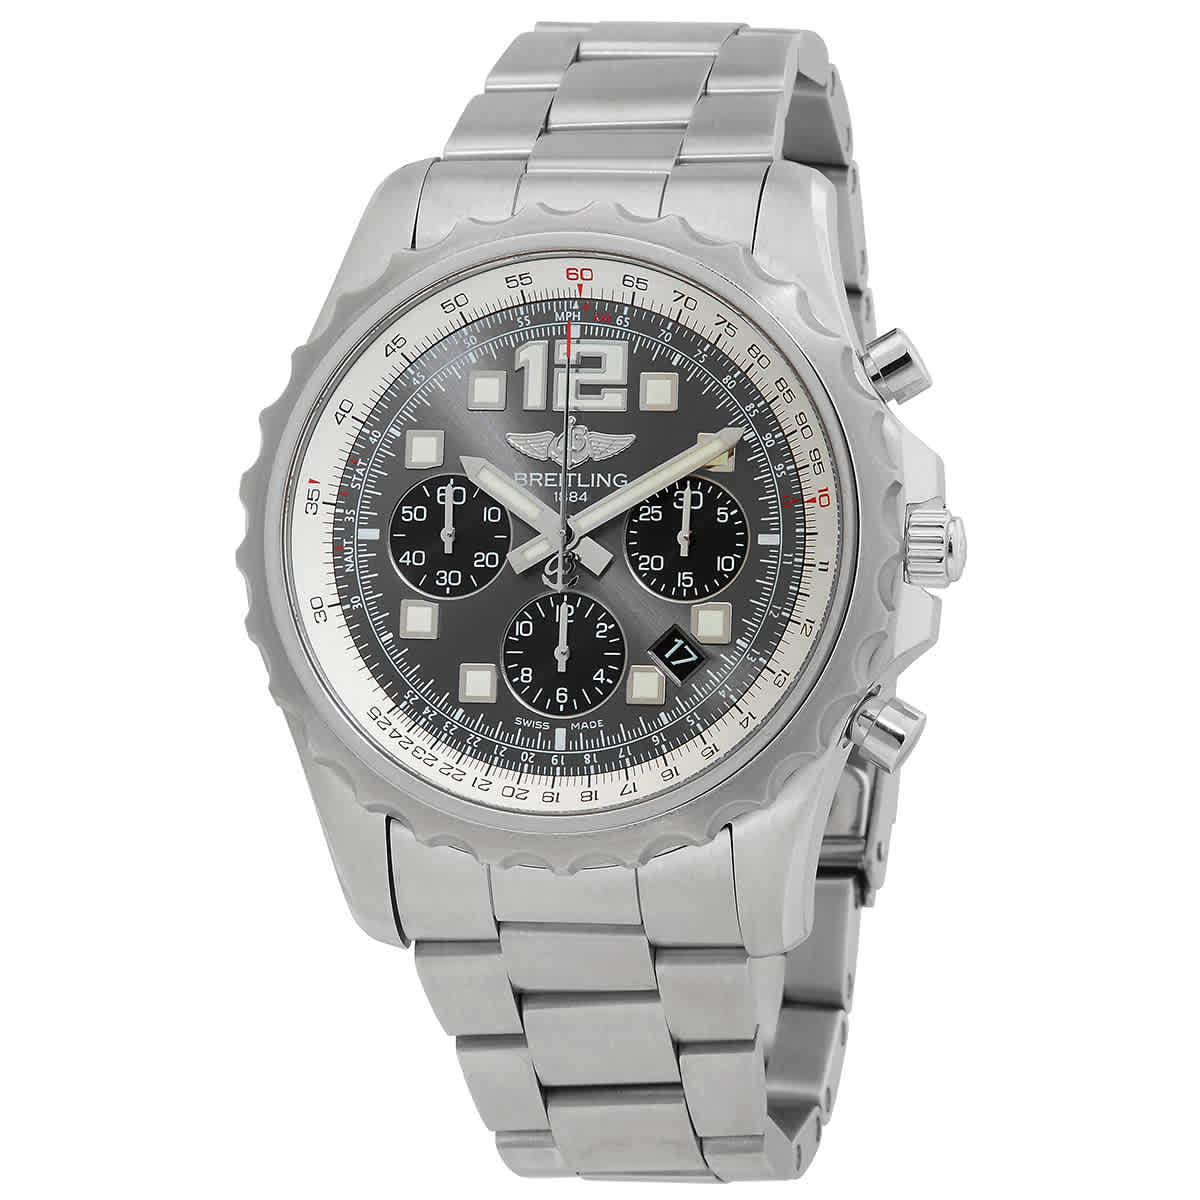 Pre-owned Breitling Chronograph Automatic Watch A2336035-f555-167a In Gray